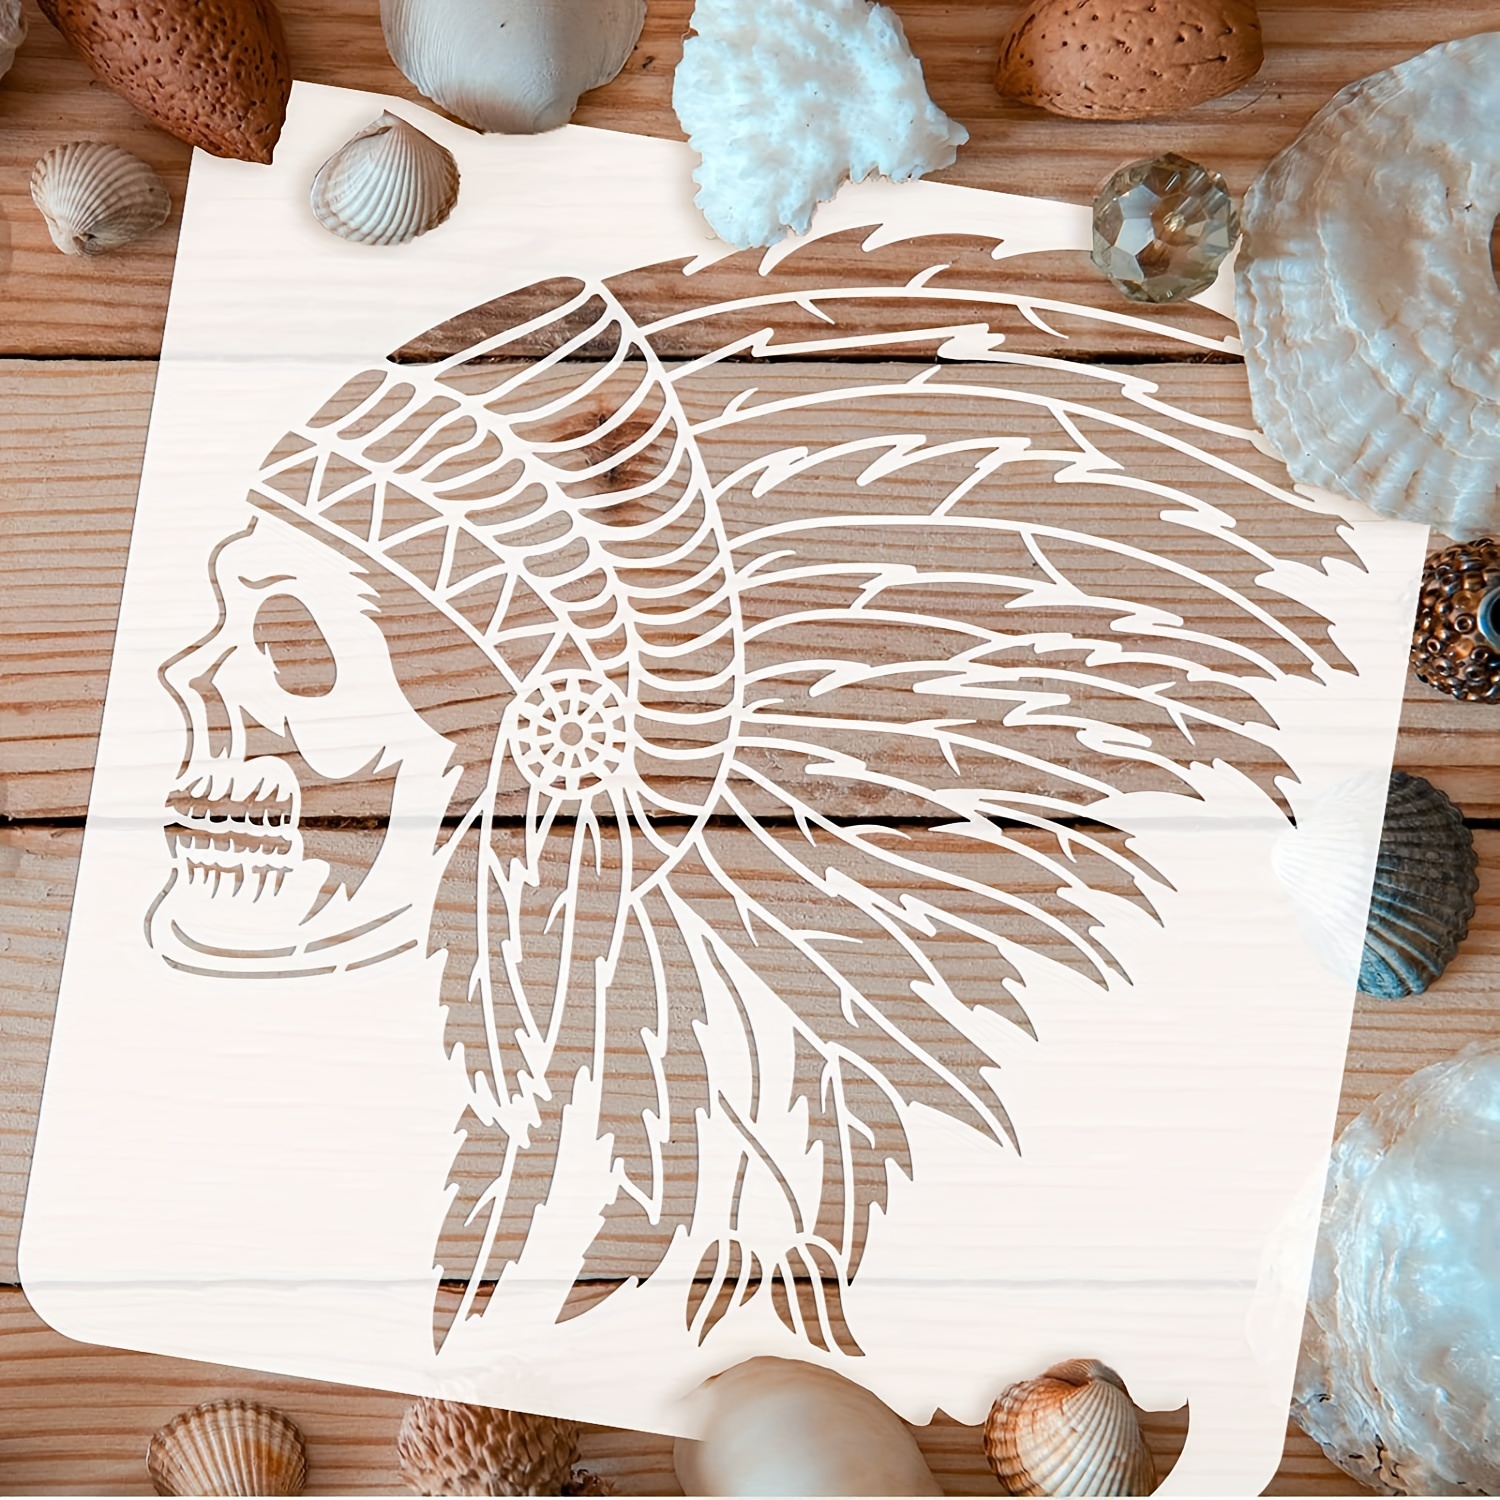 Native American Chief Stencils for Painting on Canvas Best Vinyl Large  Indigenous Headdress Indian Stencil Paint Stencil for Wood, Wall, Fabric  -XS